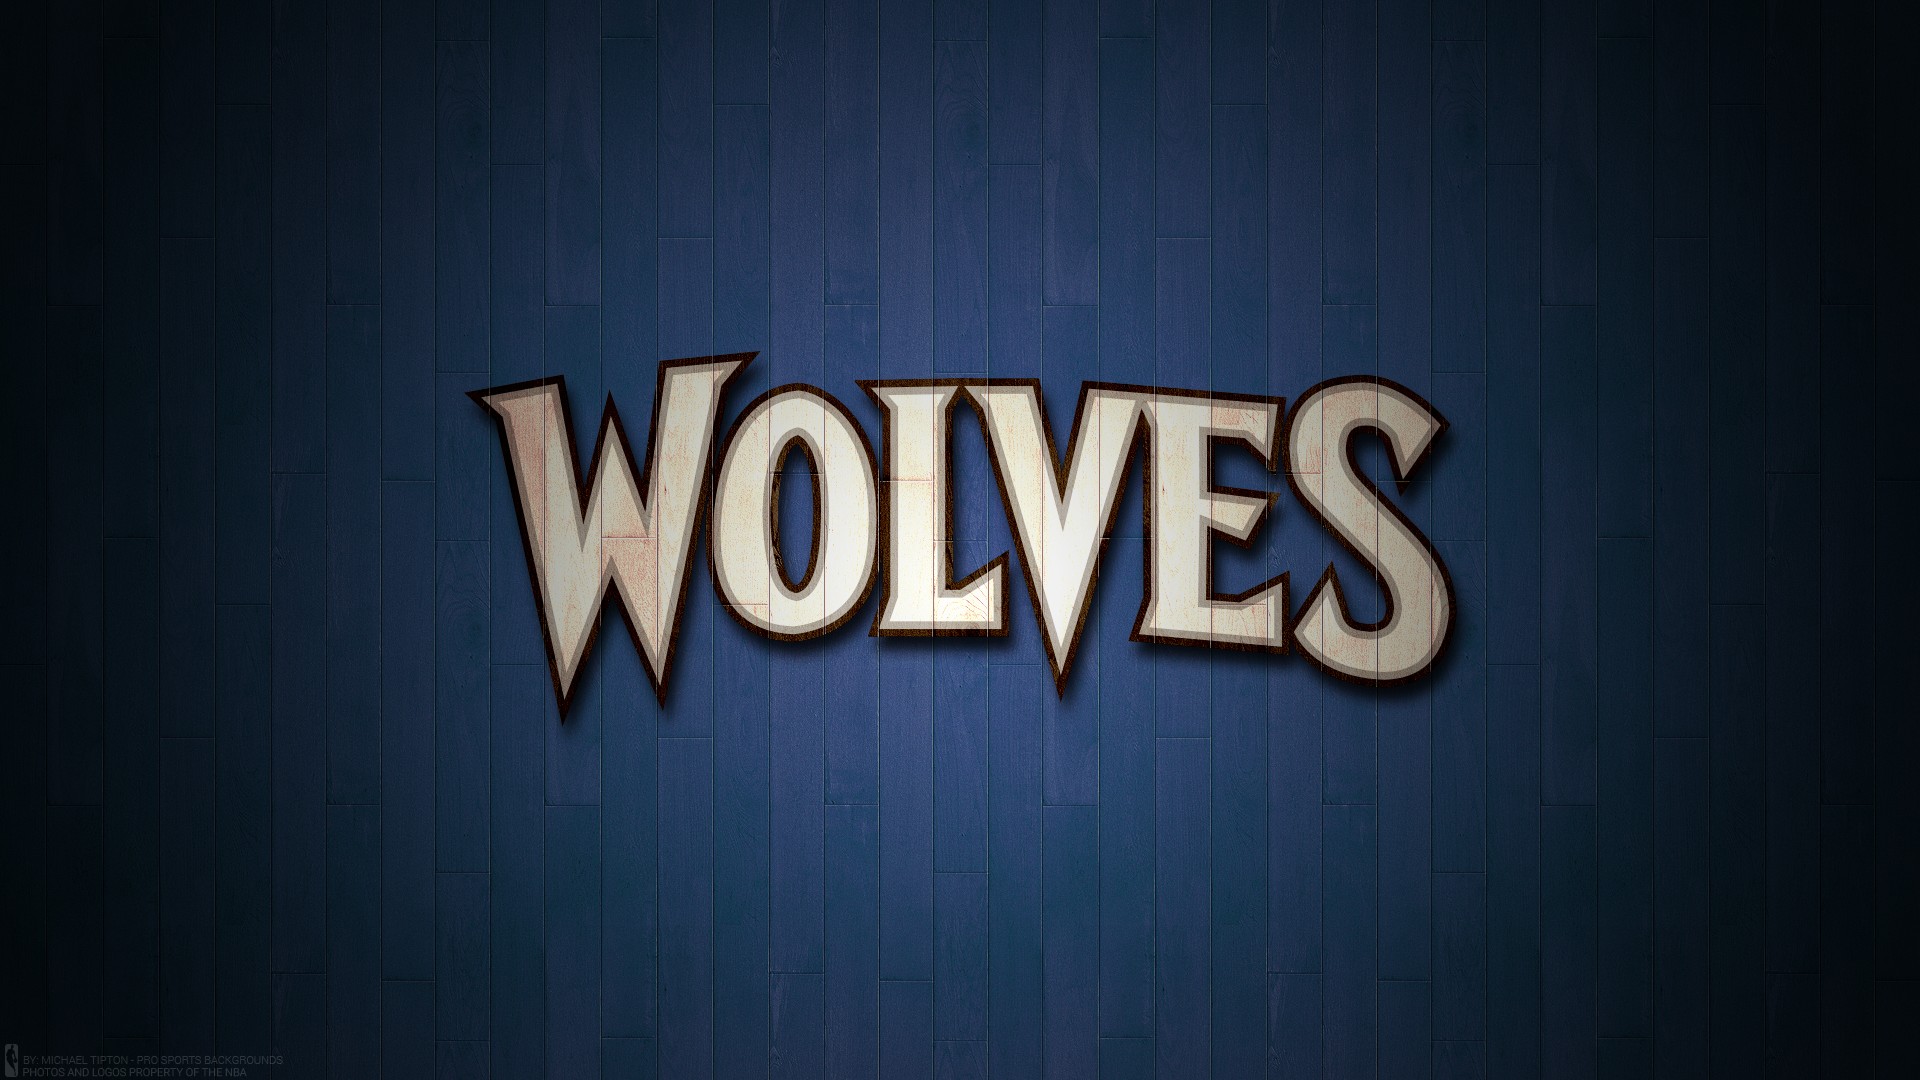 Windows Wallpaper Minnesota Timberwolves with high-resolution 1920x1080 pixel. You can use this wallpaper for your Desktop Computer Backgrounds, Windows or Mac Screensavers, iPhone Lock screen, Tablet or Android and another Mobile Phone device